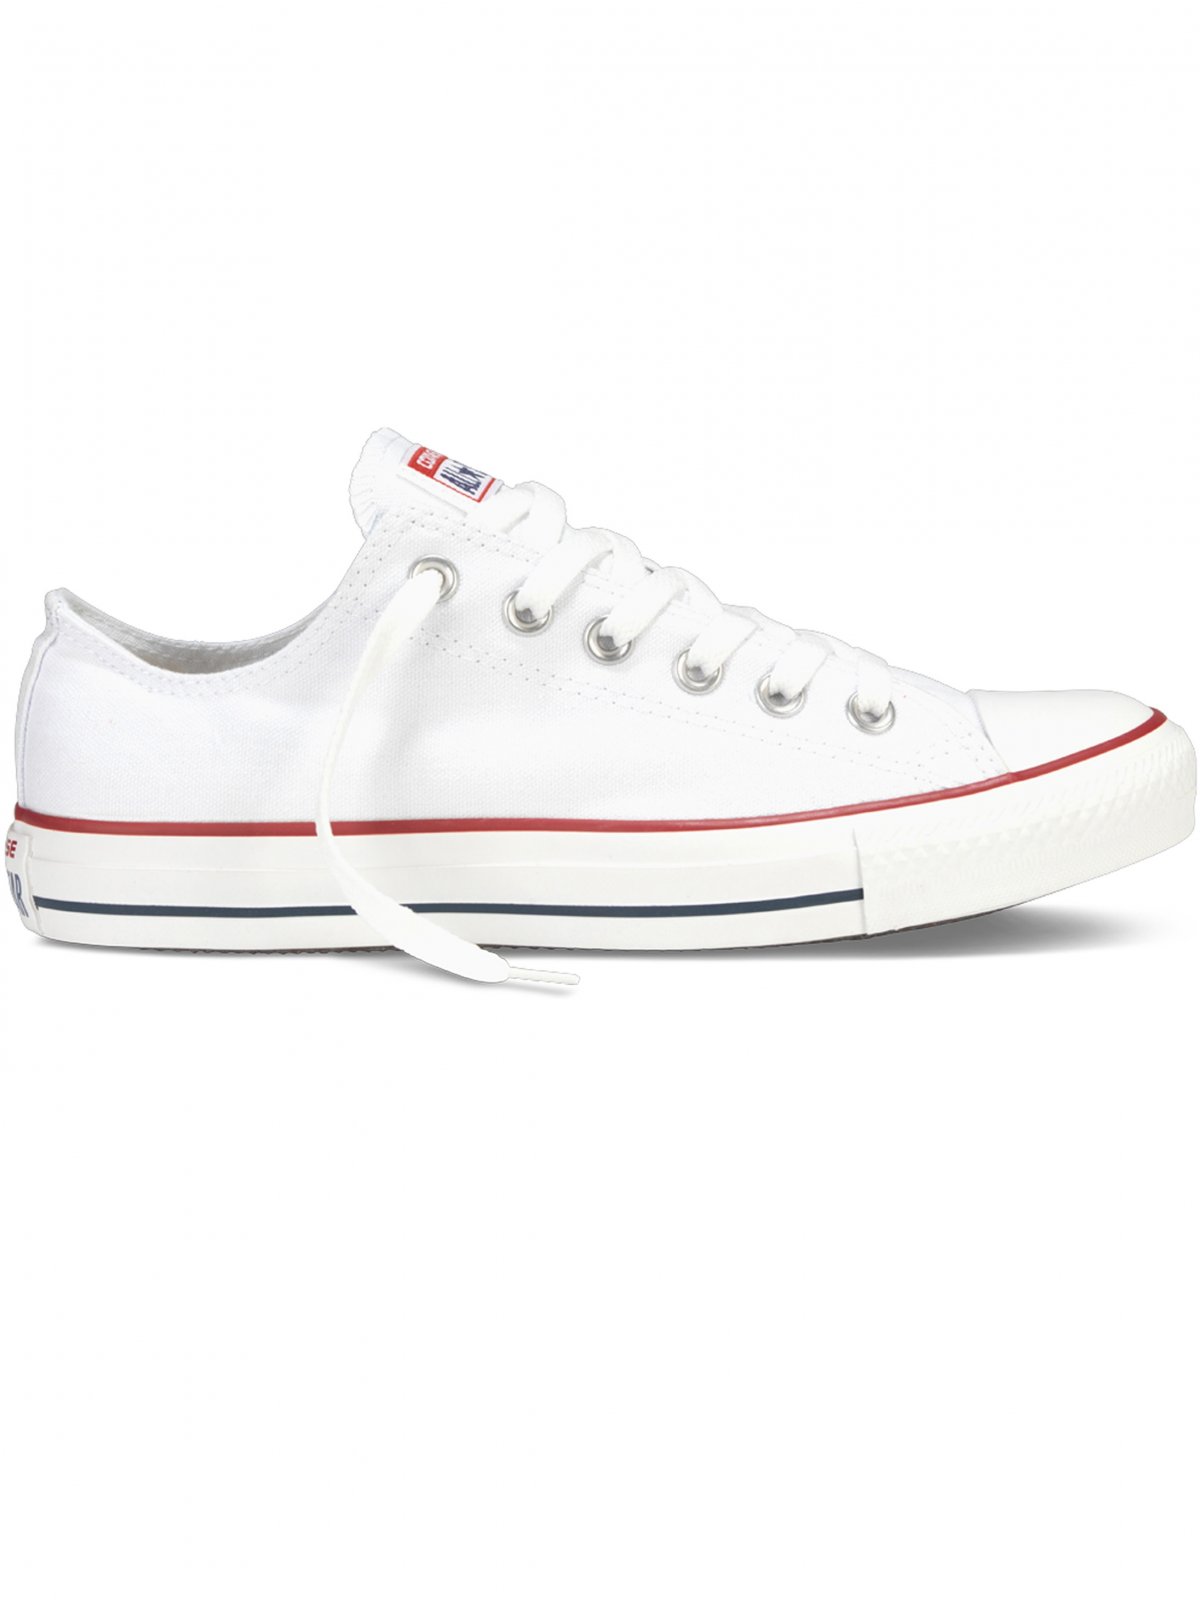 afsnit maske Reskyd Converse All Star Unisex Chuck Taylor Low Top Sneakers - White